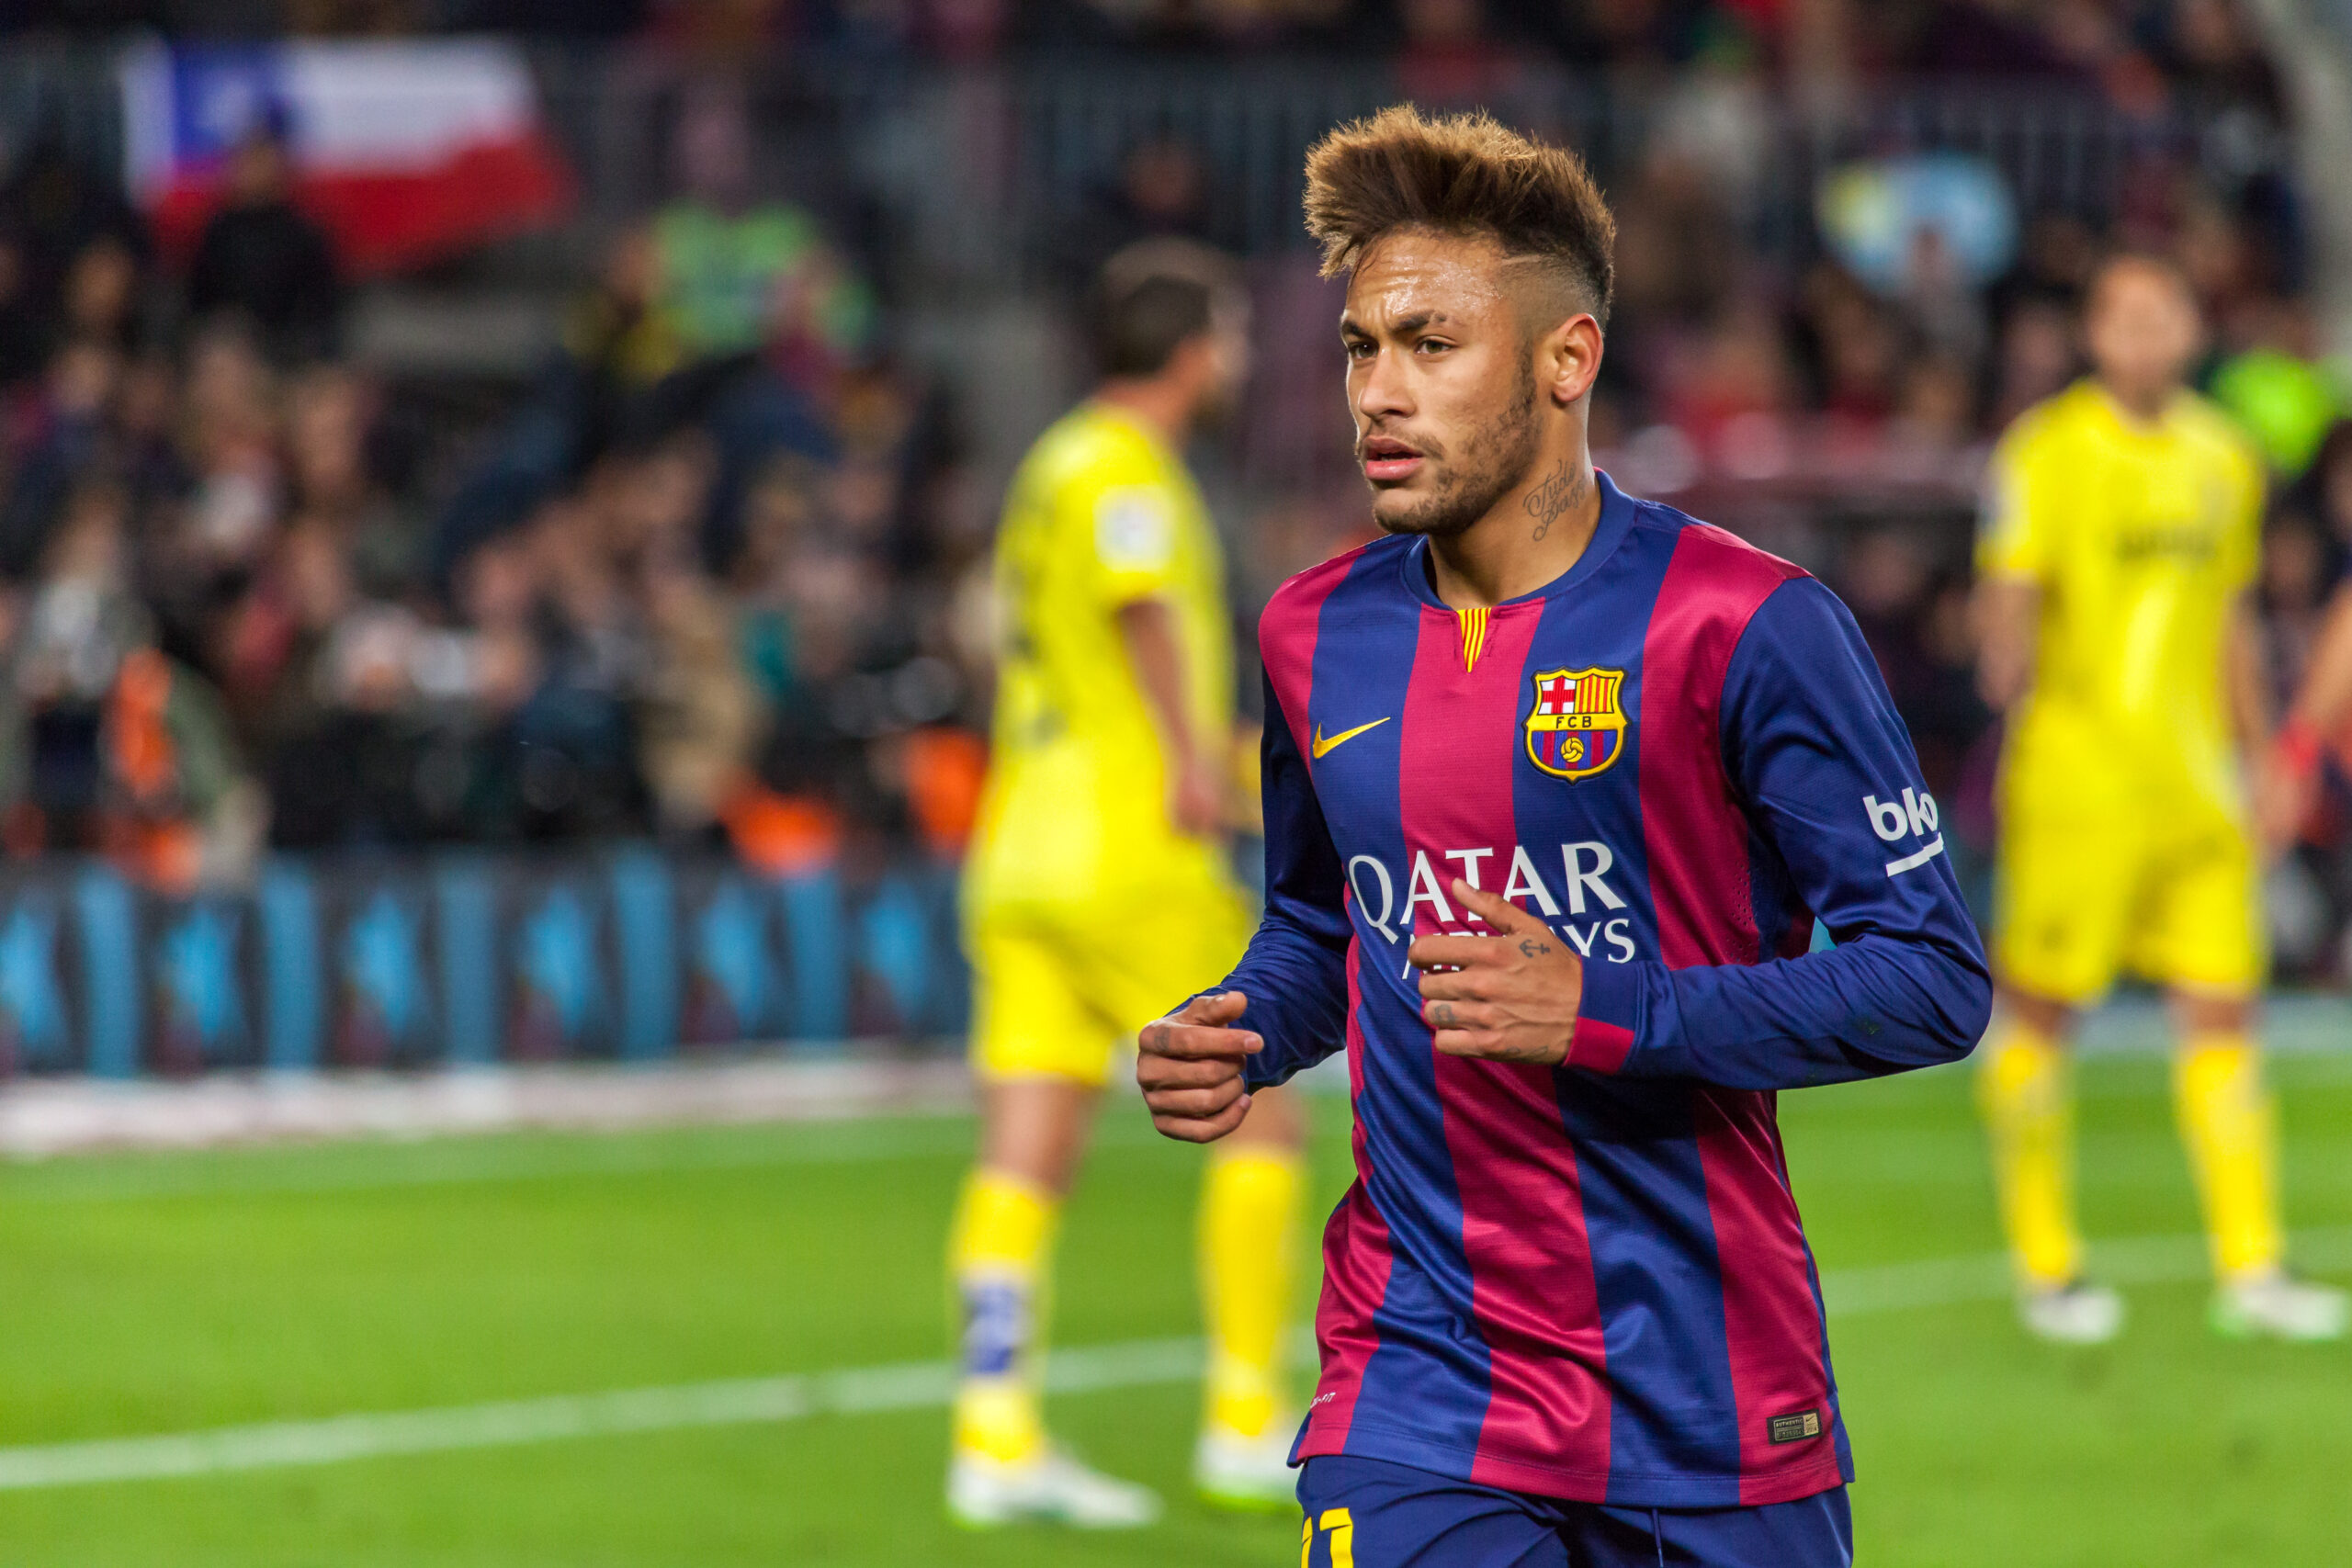  Neymar injured ahead of a big cup match. Conspiracies arise about him.